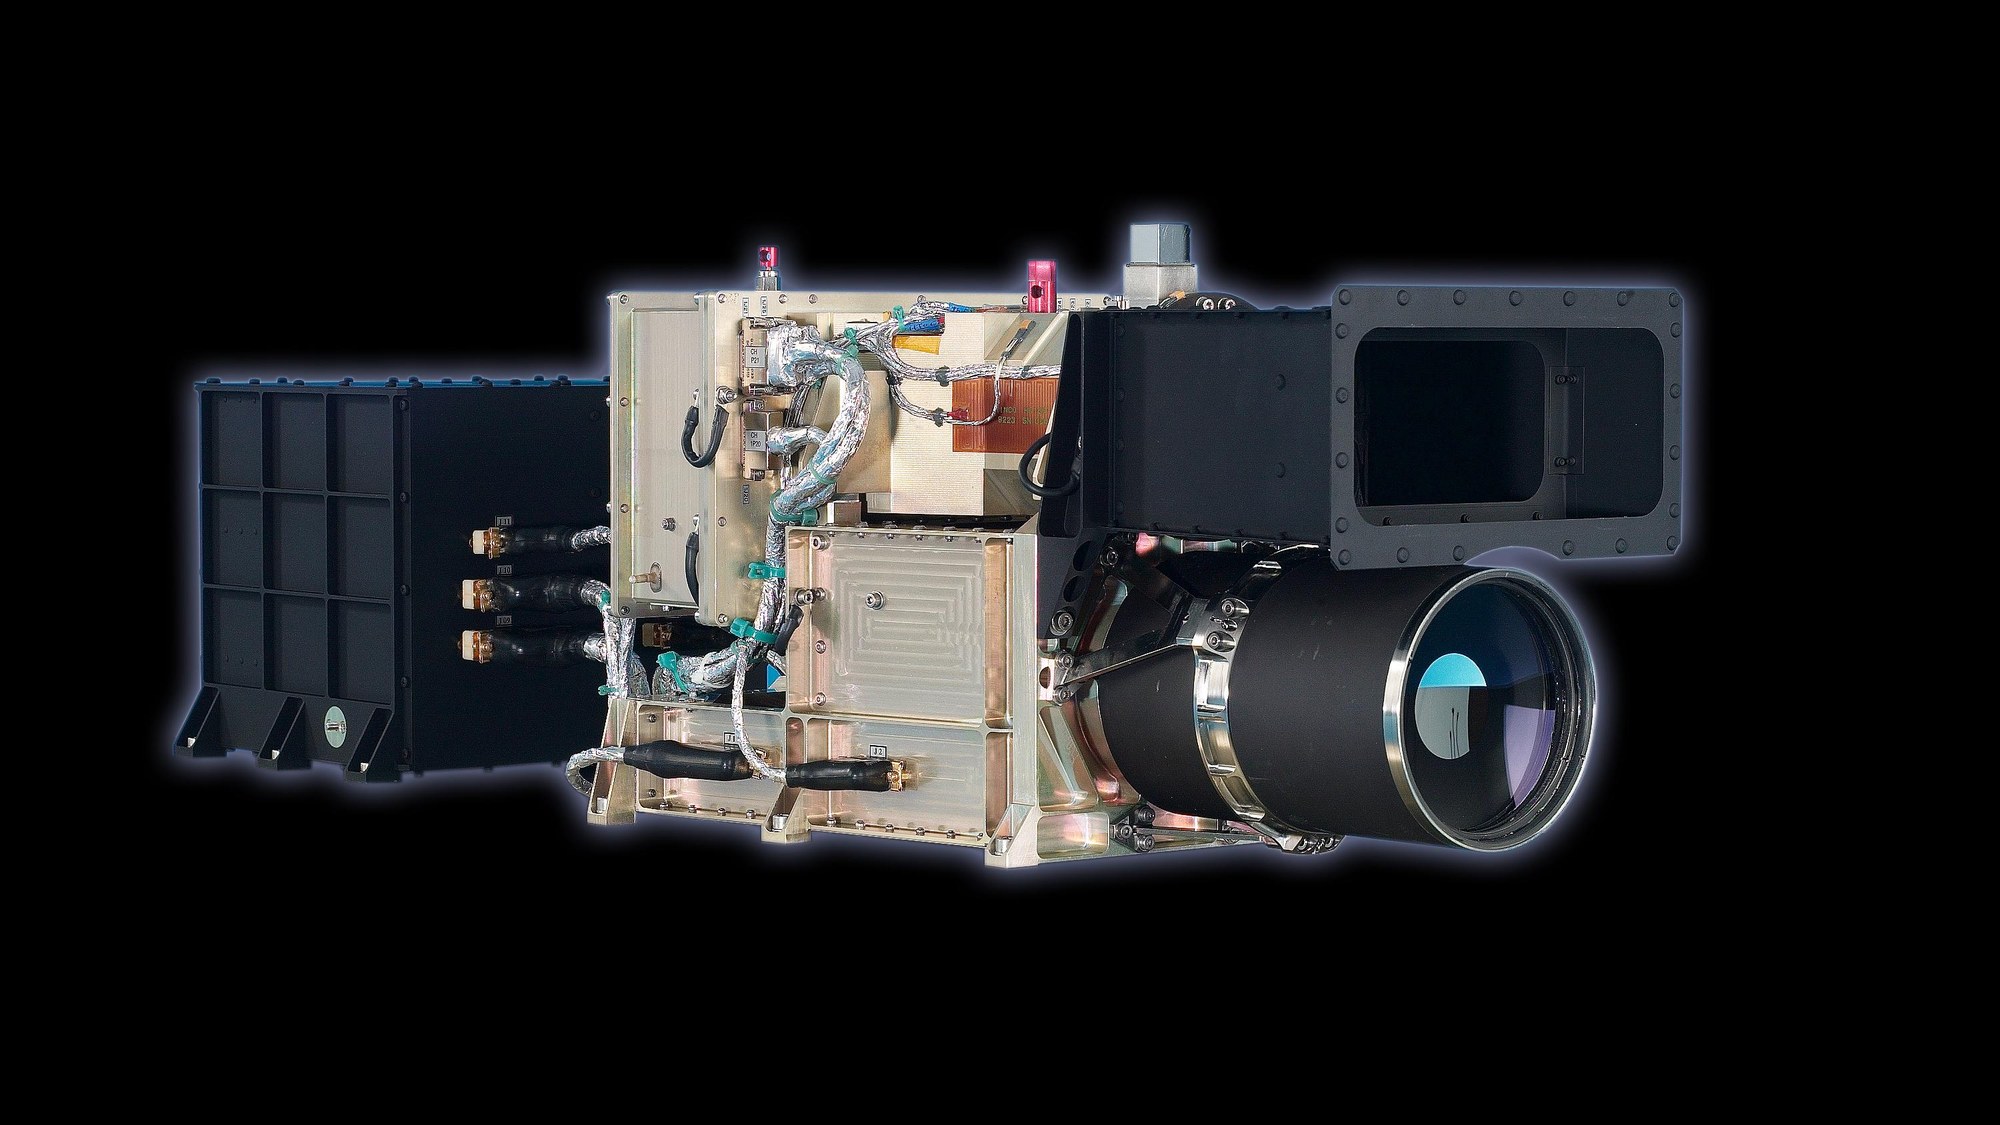 HRSC - the High Resolution Stereo Camera